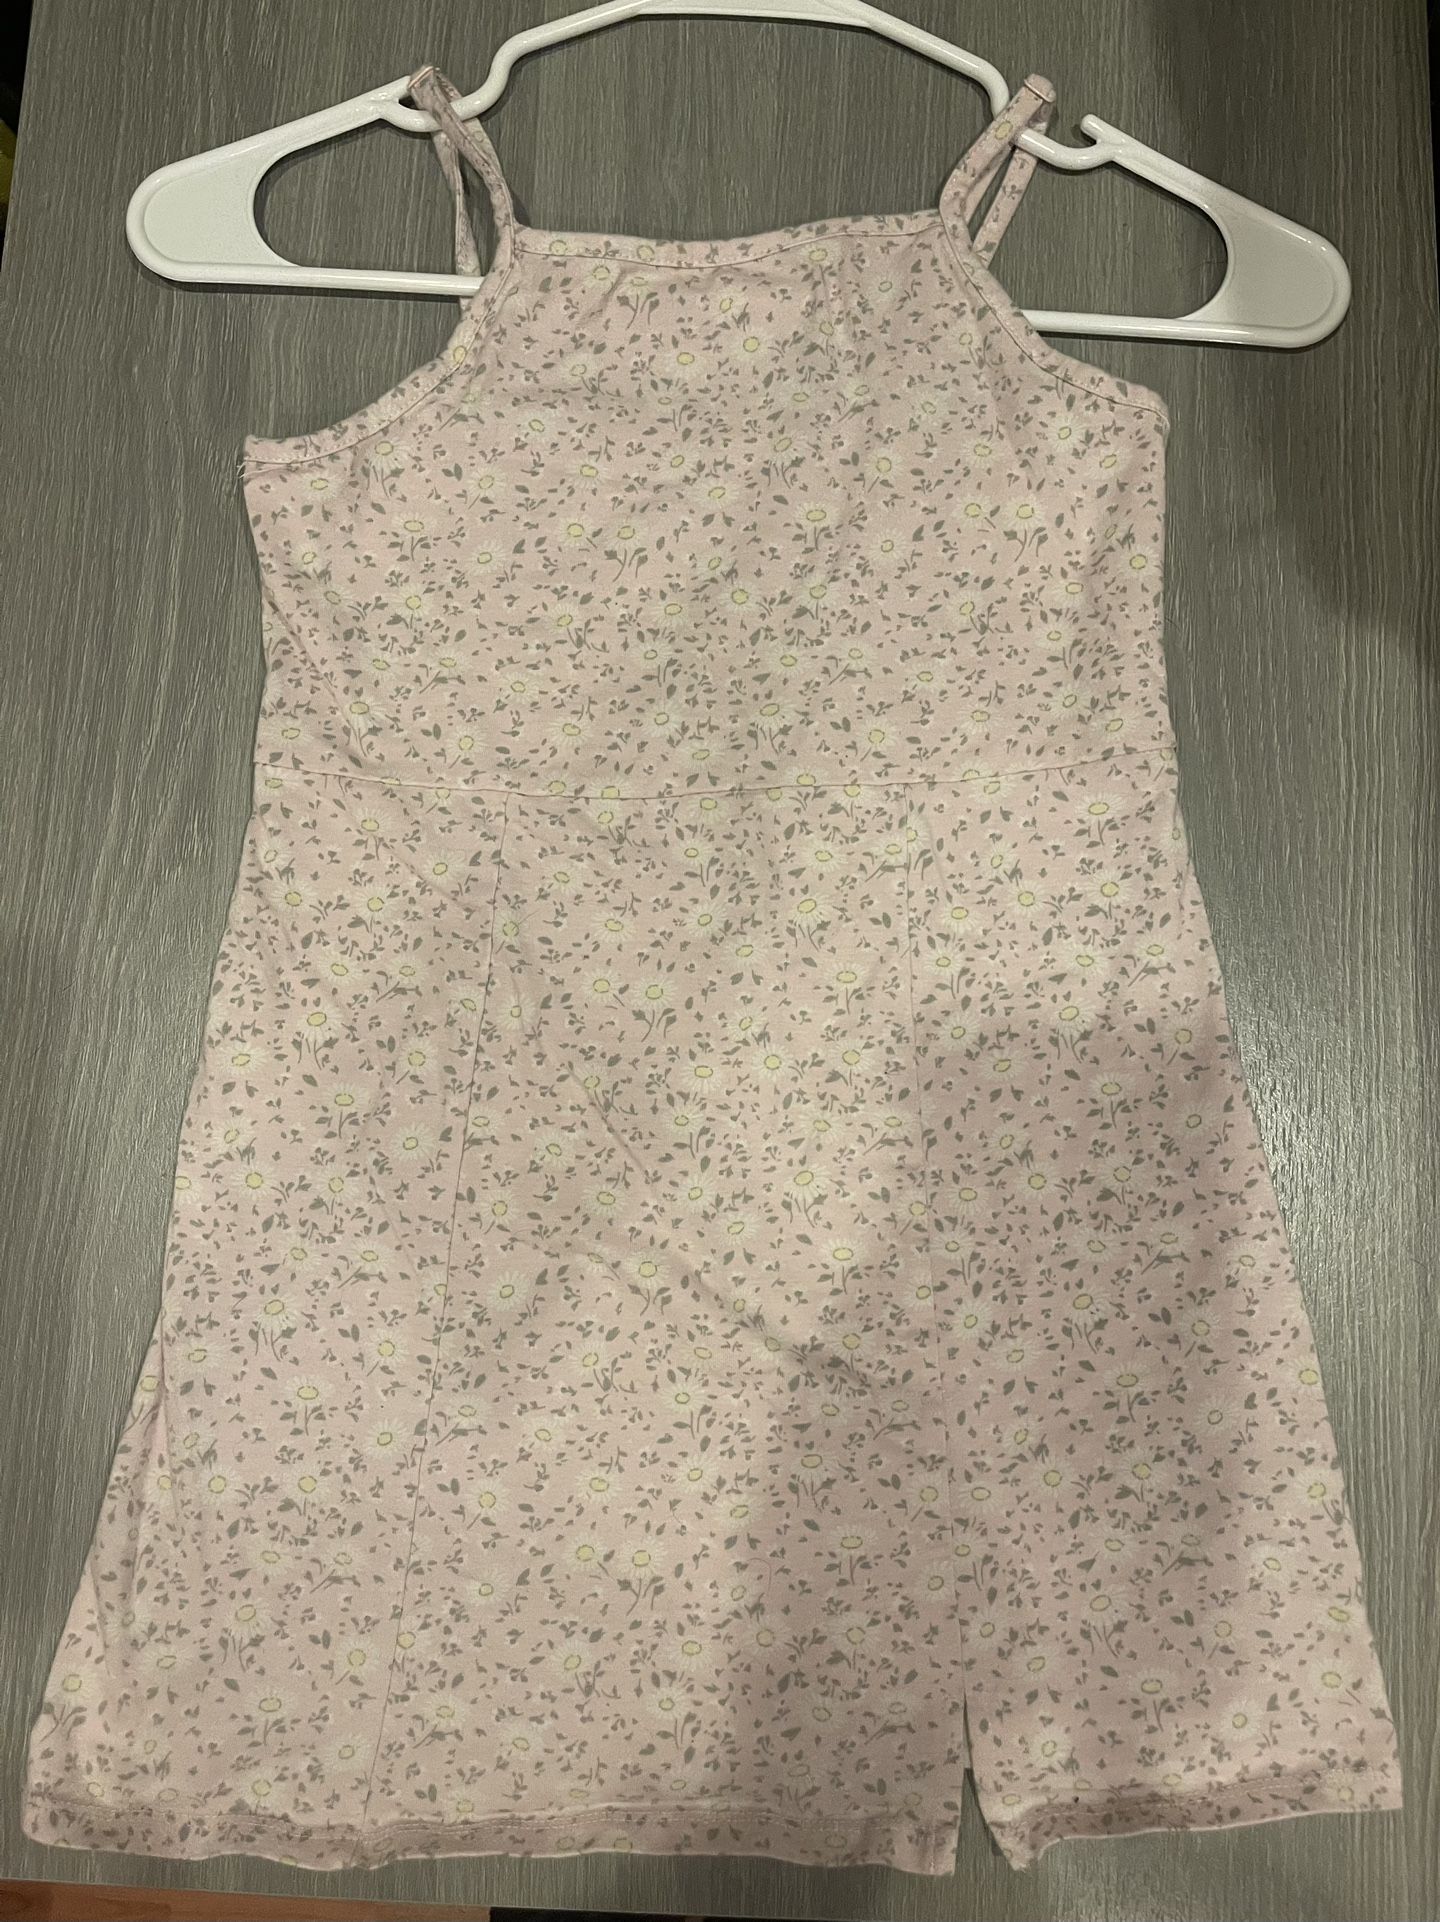 Girls Clothing Size 8 - Dress Pink With Flowers